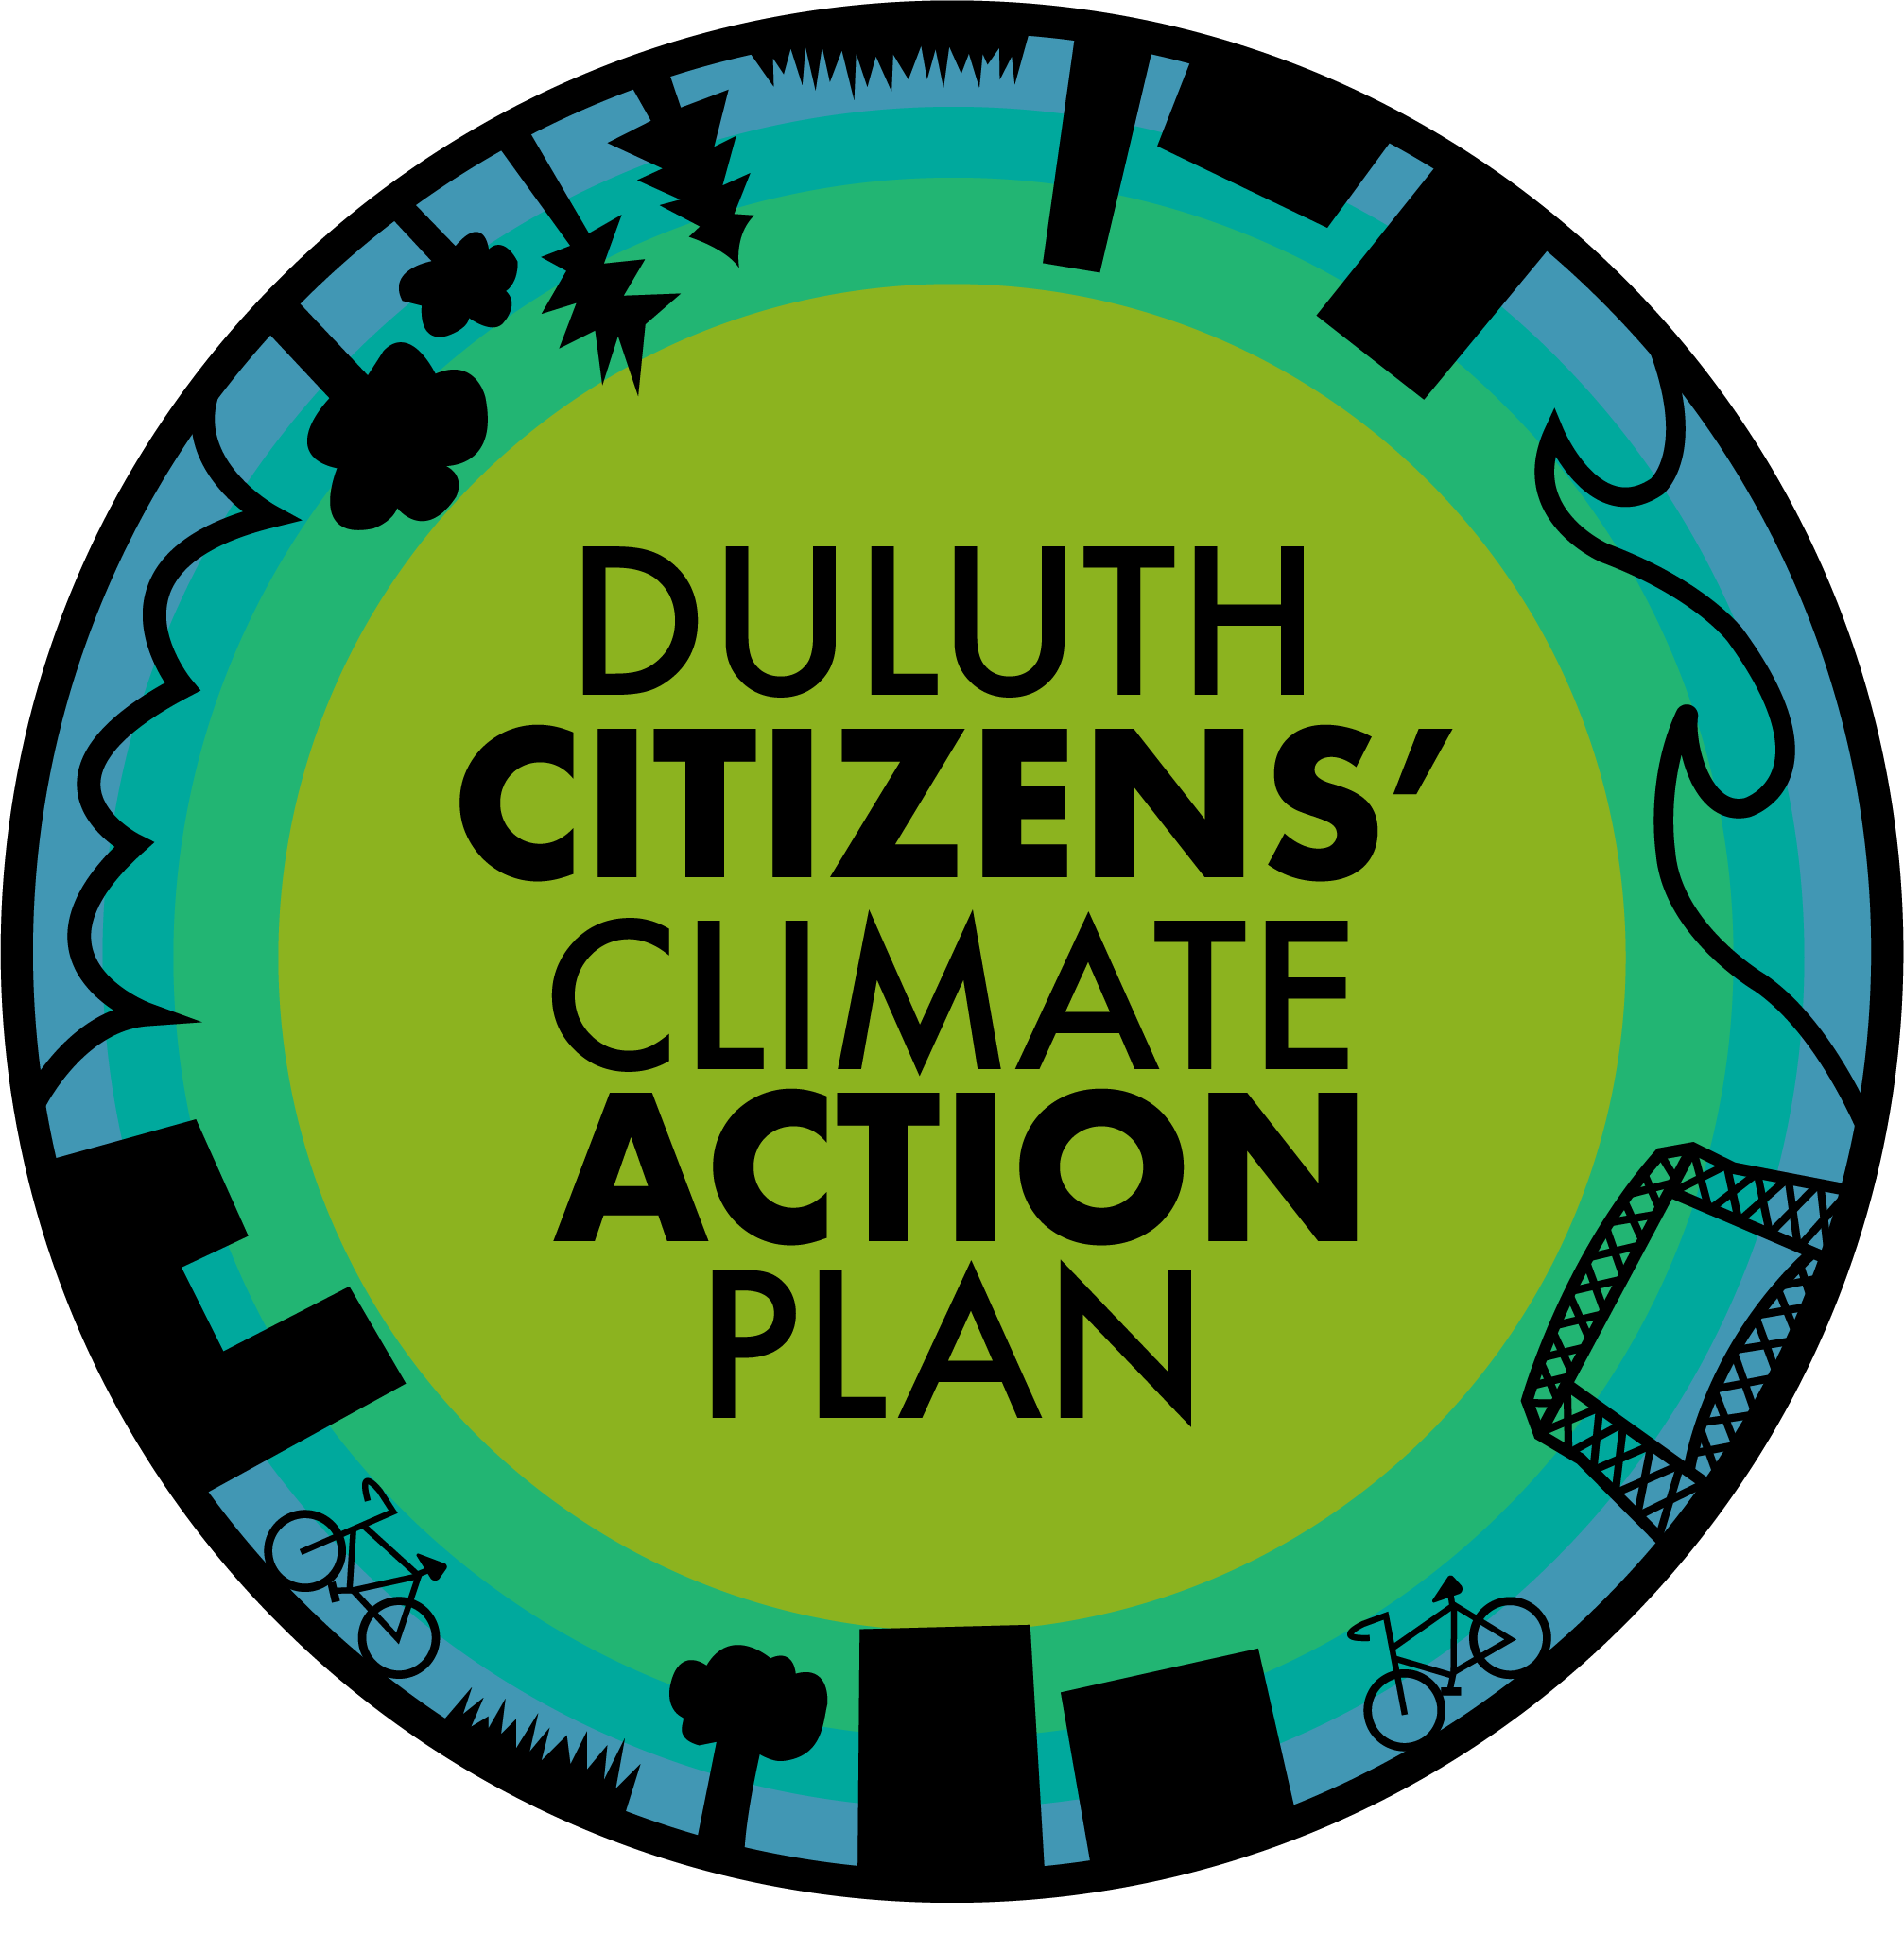 Duluth Citizens' Climate Action Plan logo